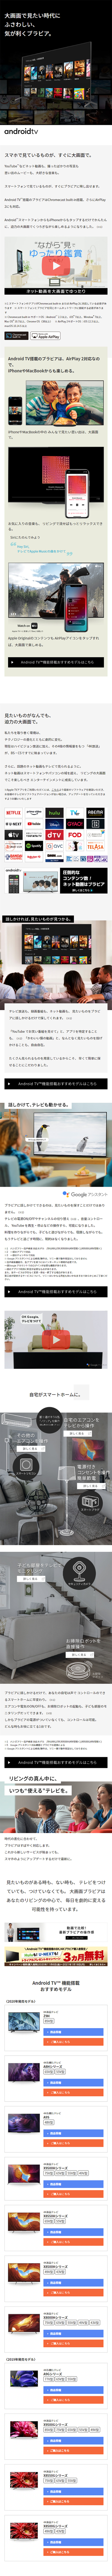 Android TV_sp_1